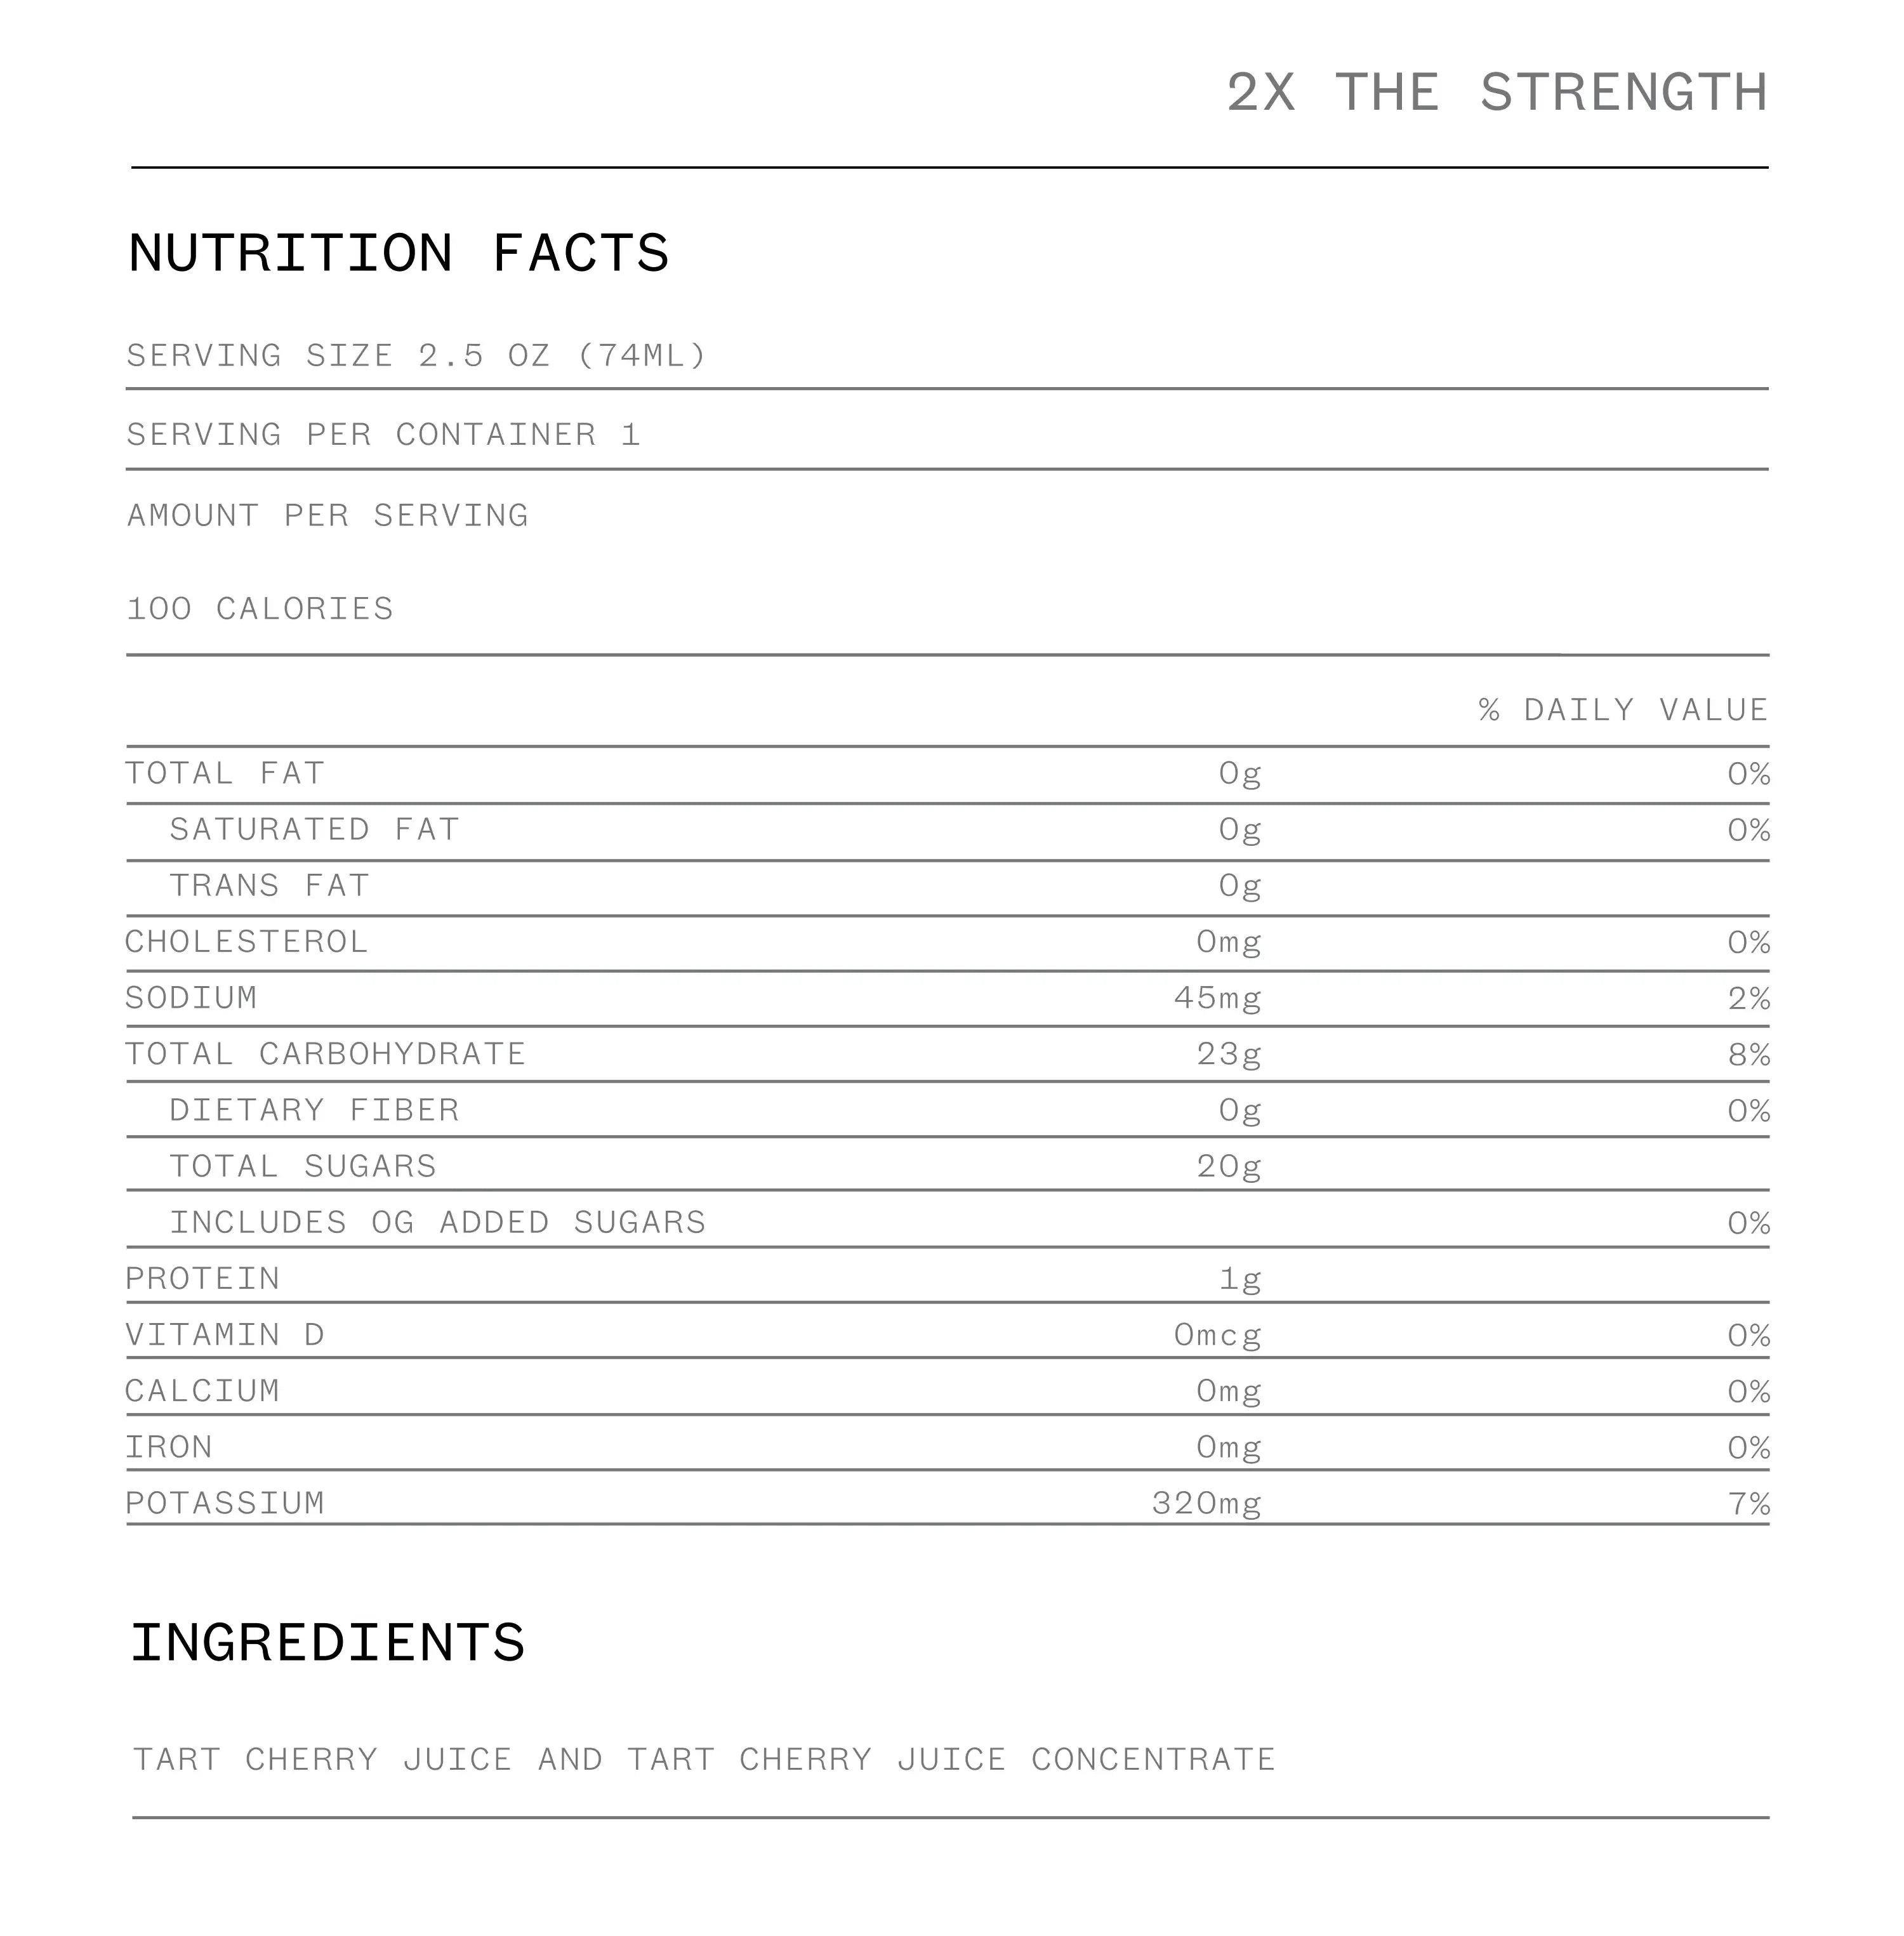 Nutrition Facts and Ingredients. Tart cherry juice concentrate. Cherry concentrate for gout. Cherry extract.